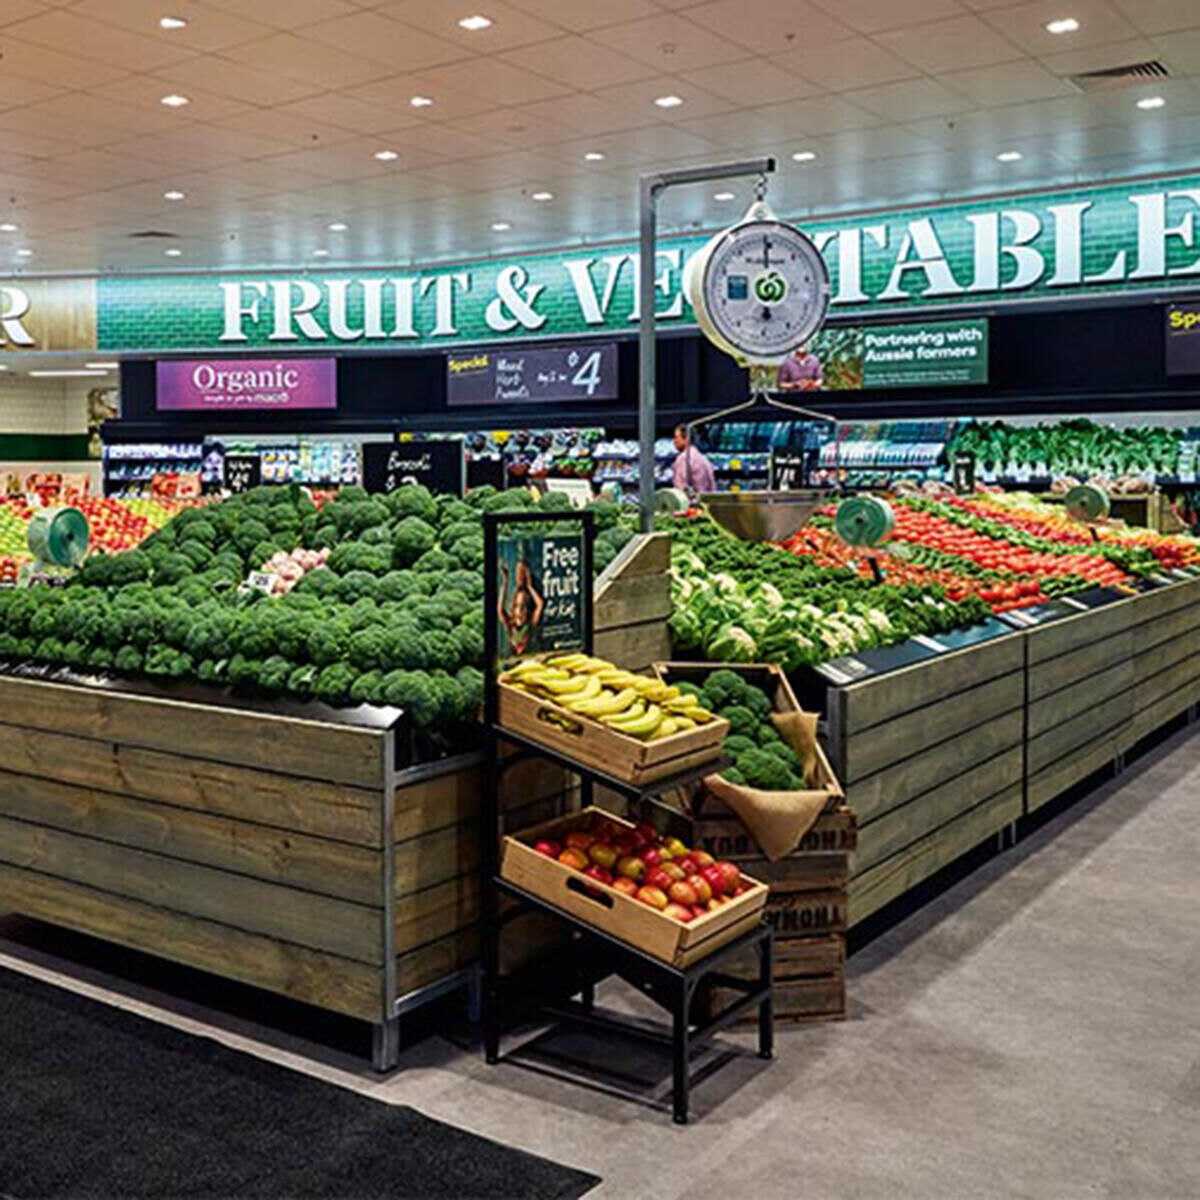 Woolworths Healthier Options to help shoppers make small but meaningful changes